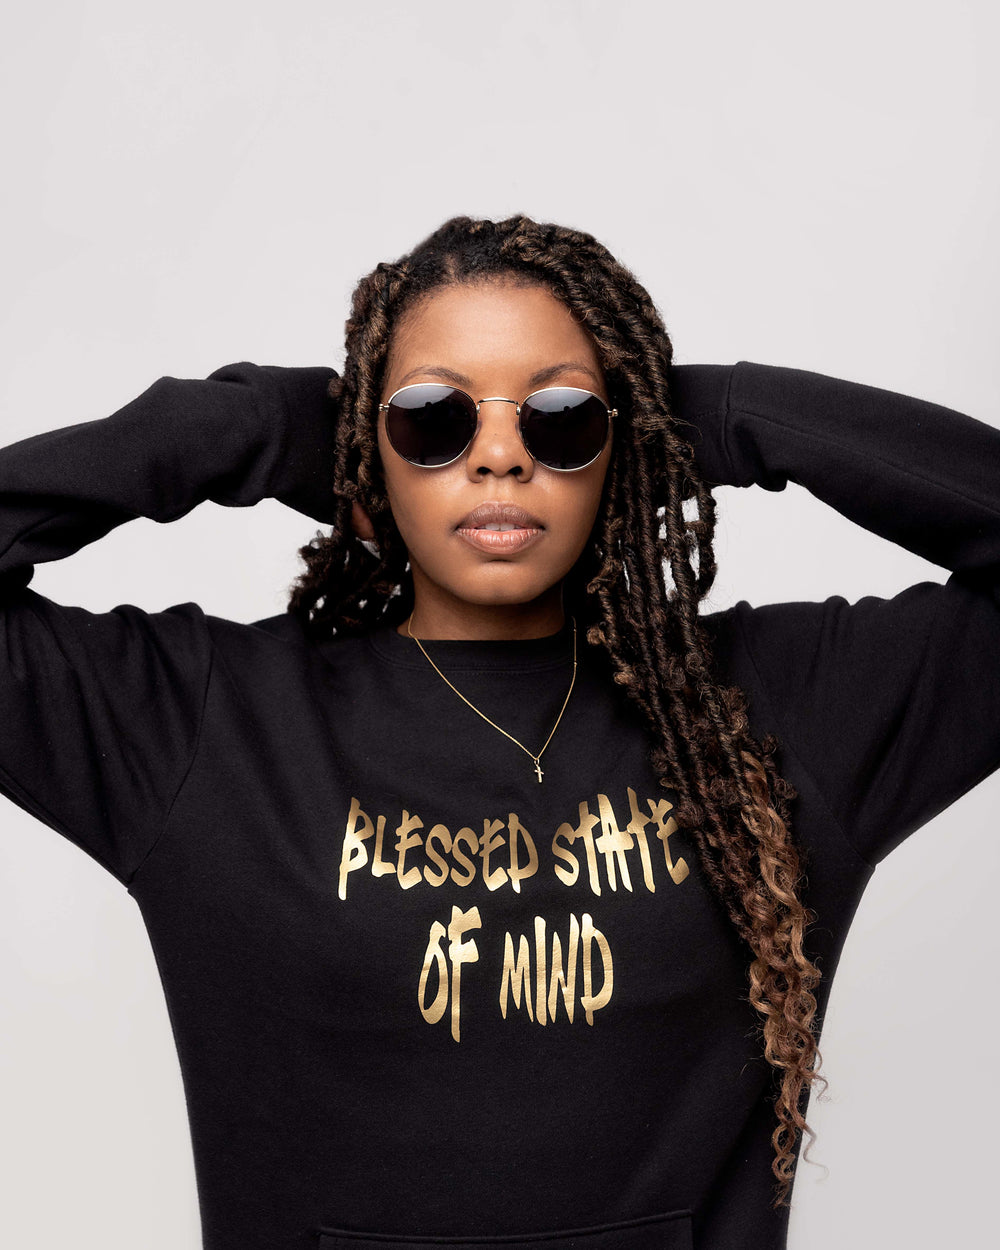 Blessed State of Mind is a Exclusive Christian Inspired Clothing Line made to Encourage God's people